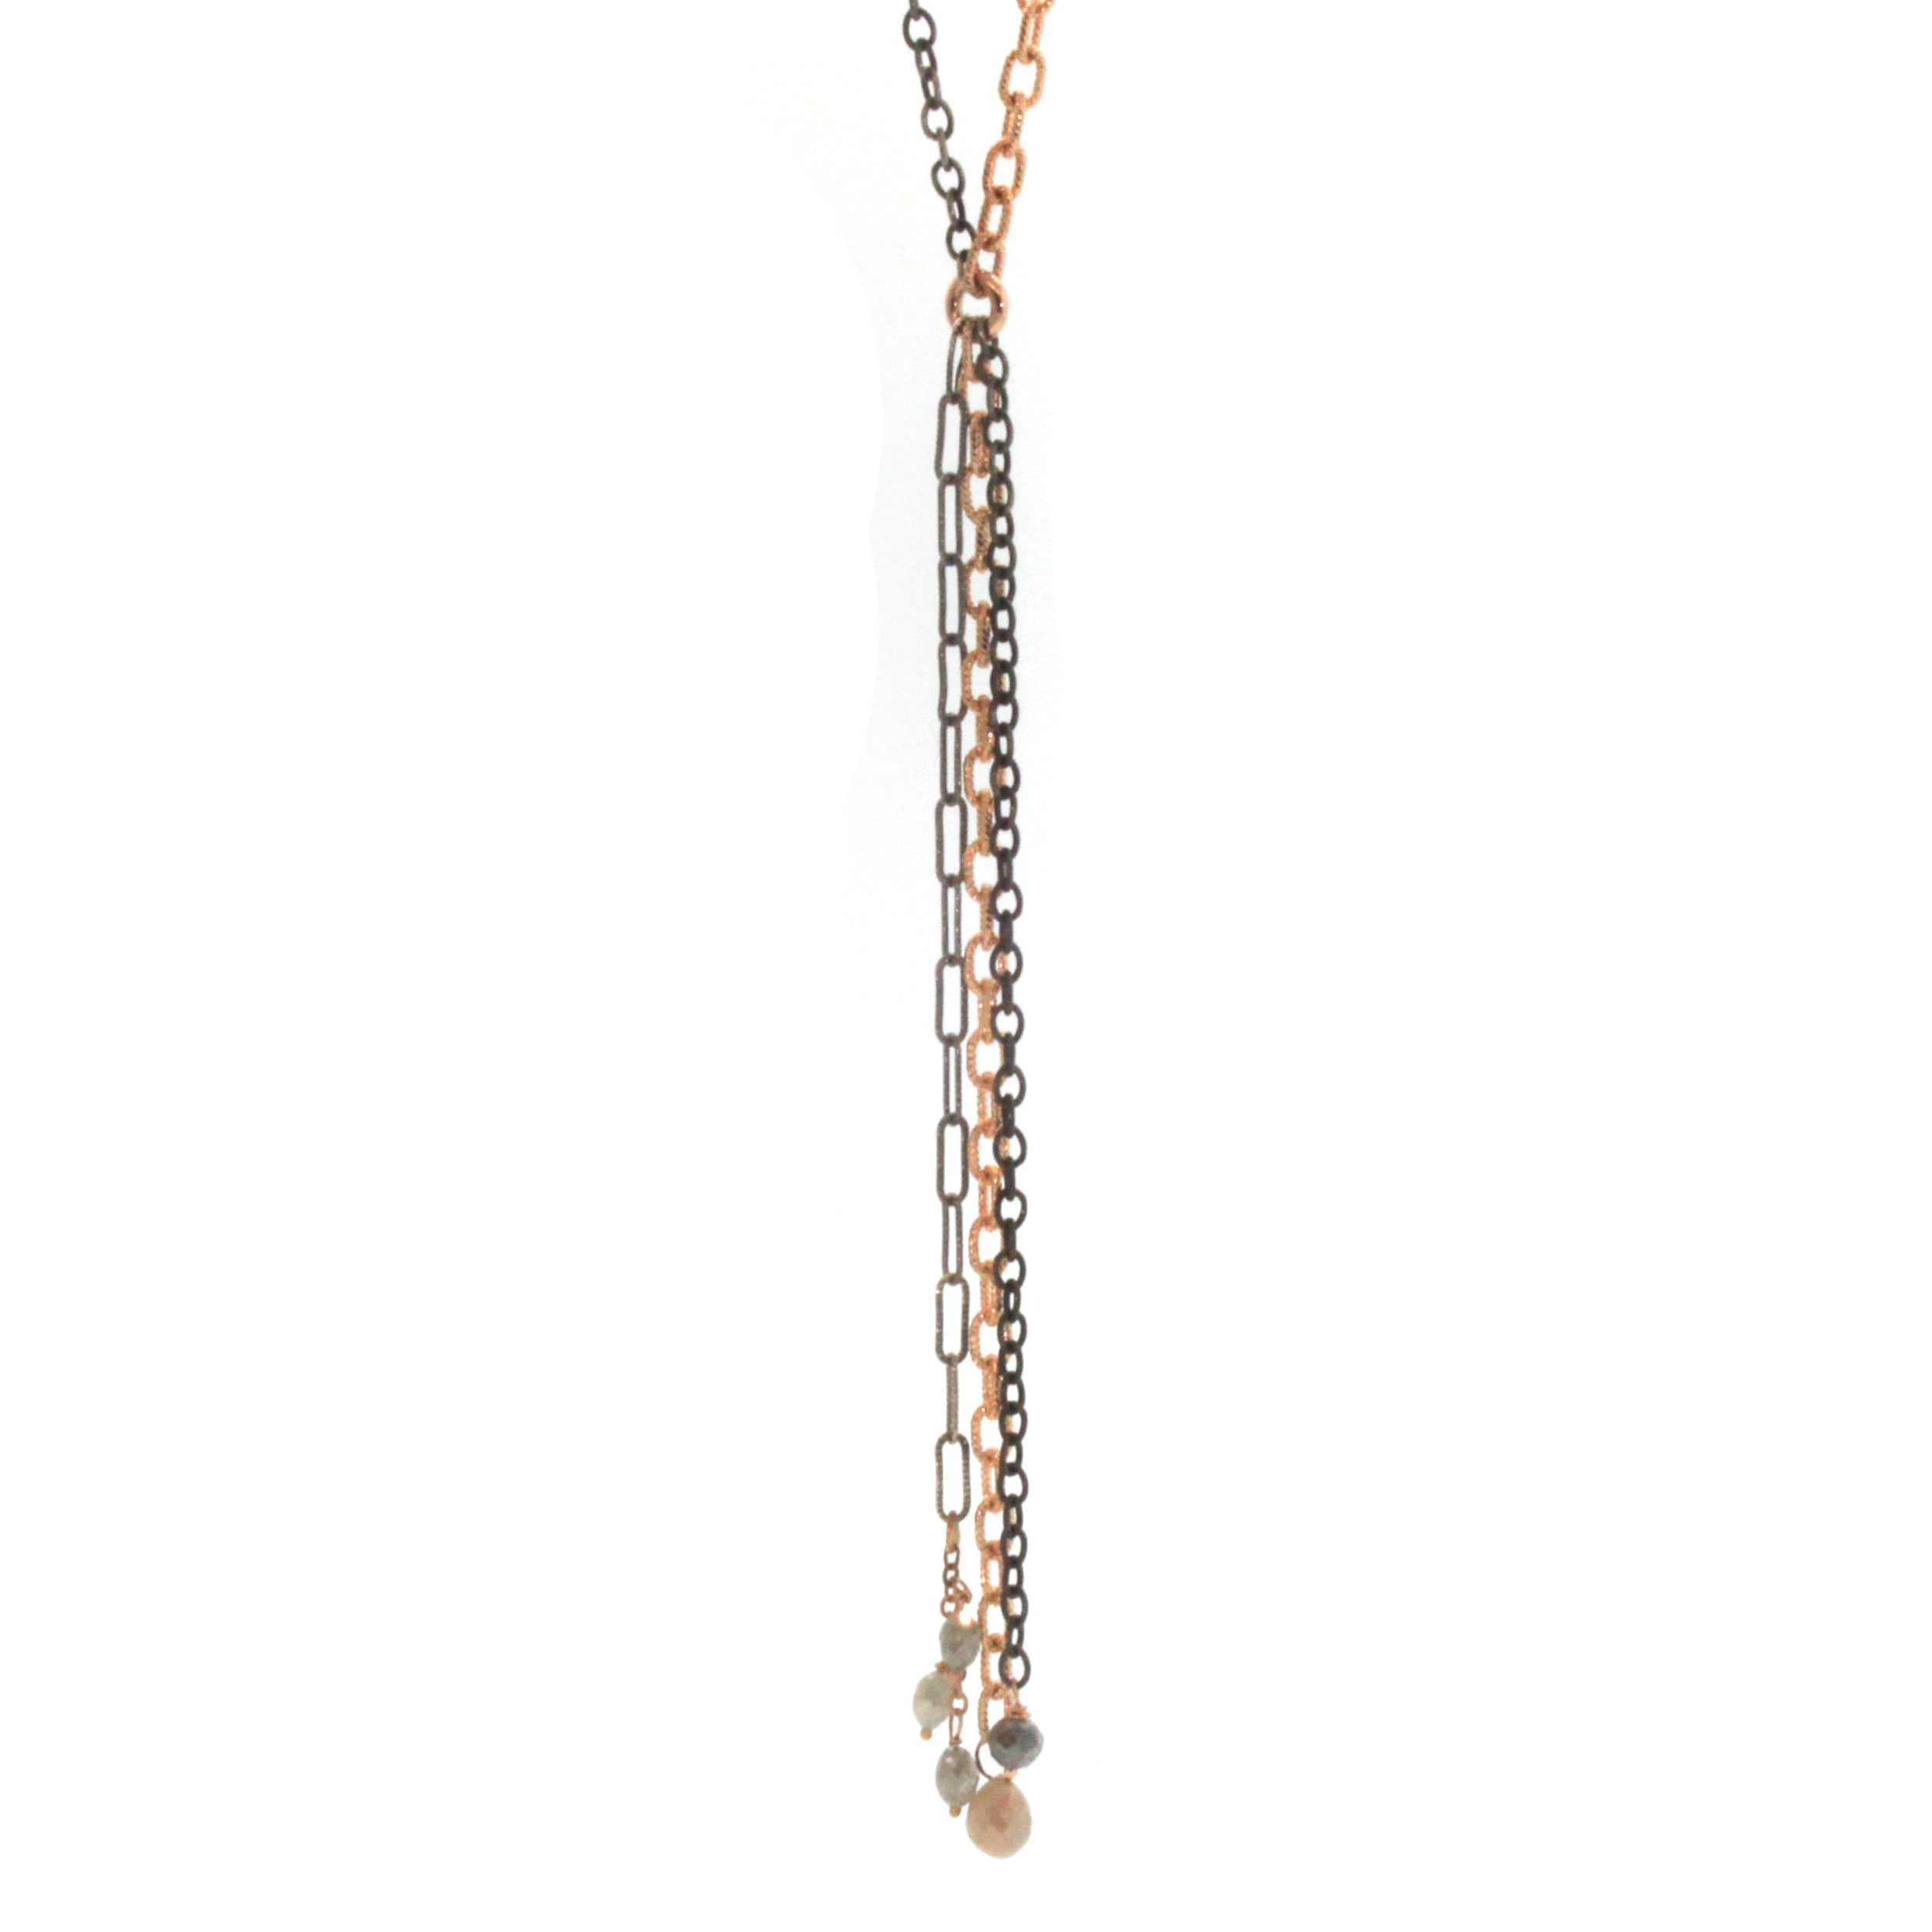 This Diamond & Sapphire Mixed Chain Necklace was expertly hand crafted at Rebecca Lankford Designs in Houston, Texas. 